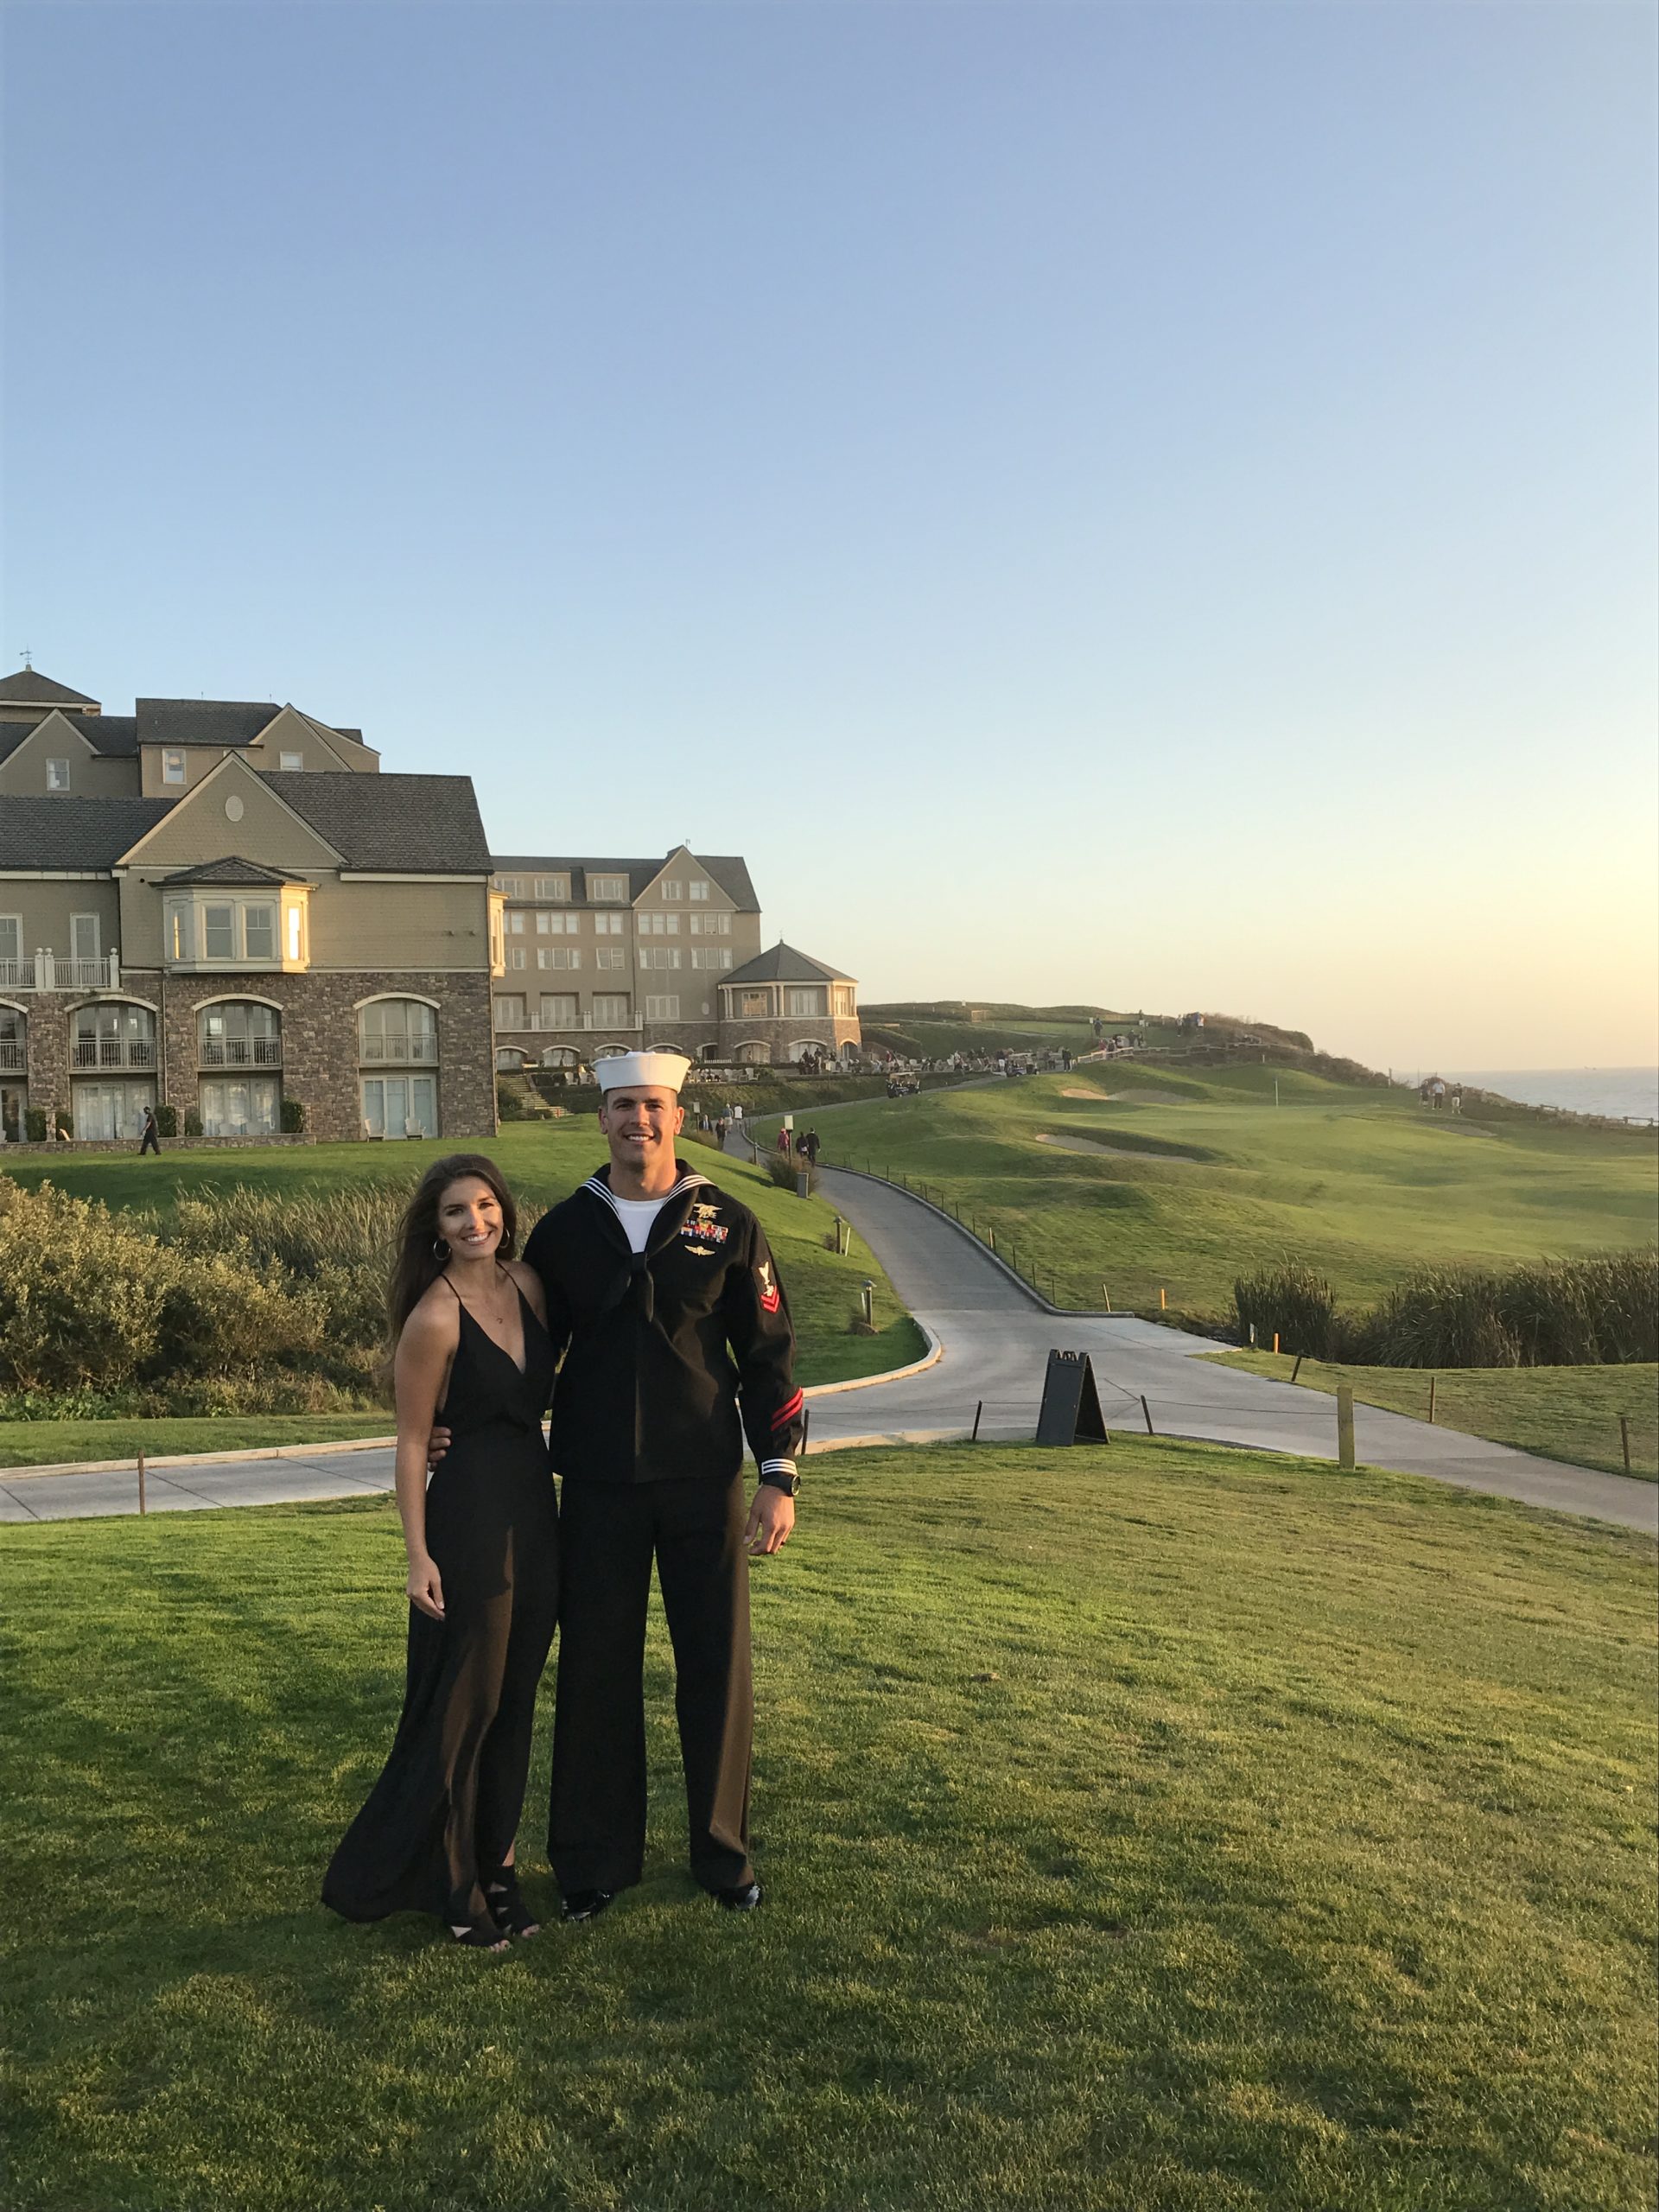 The Navy Seal Foundation hosted us for a whole weekend at Half Moon Bay, all expenses paid. Best weekend ever!